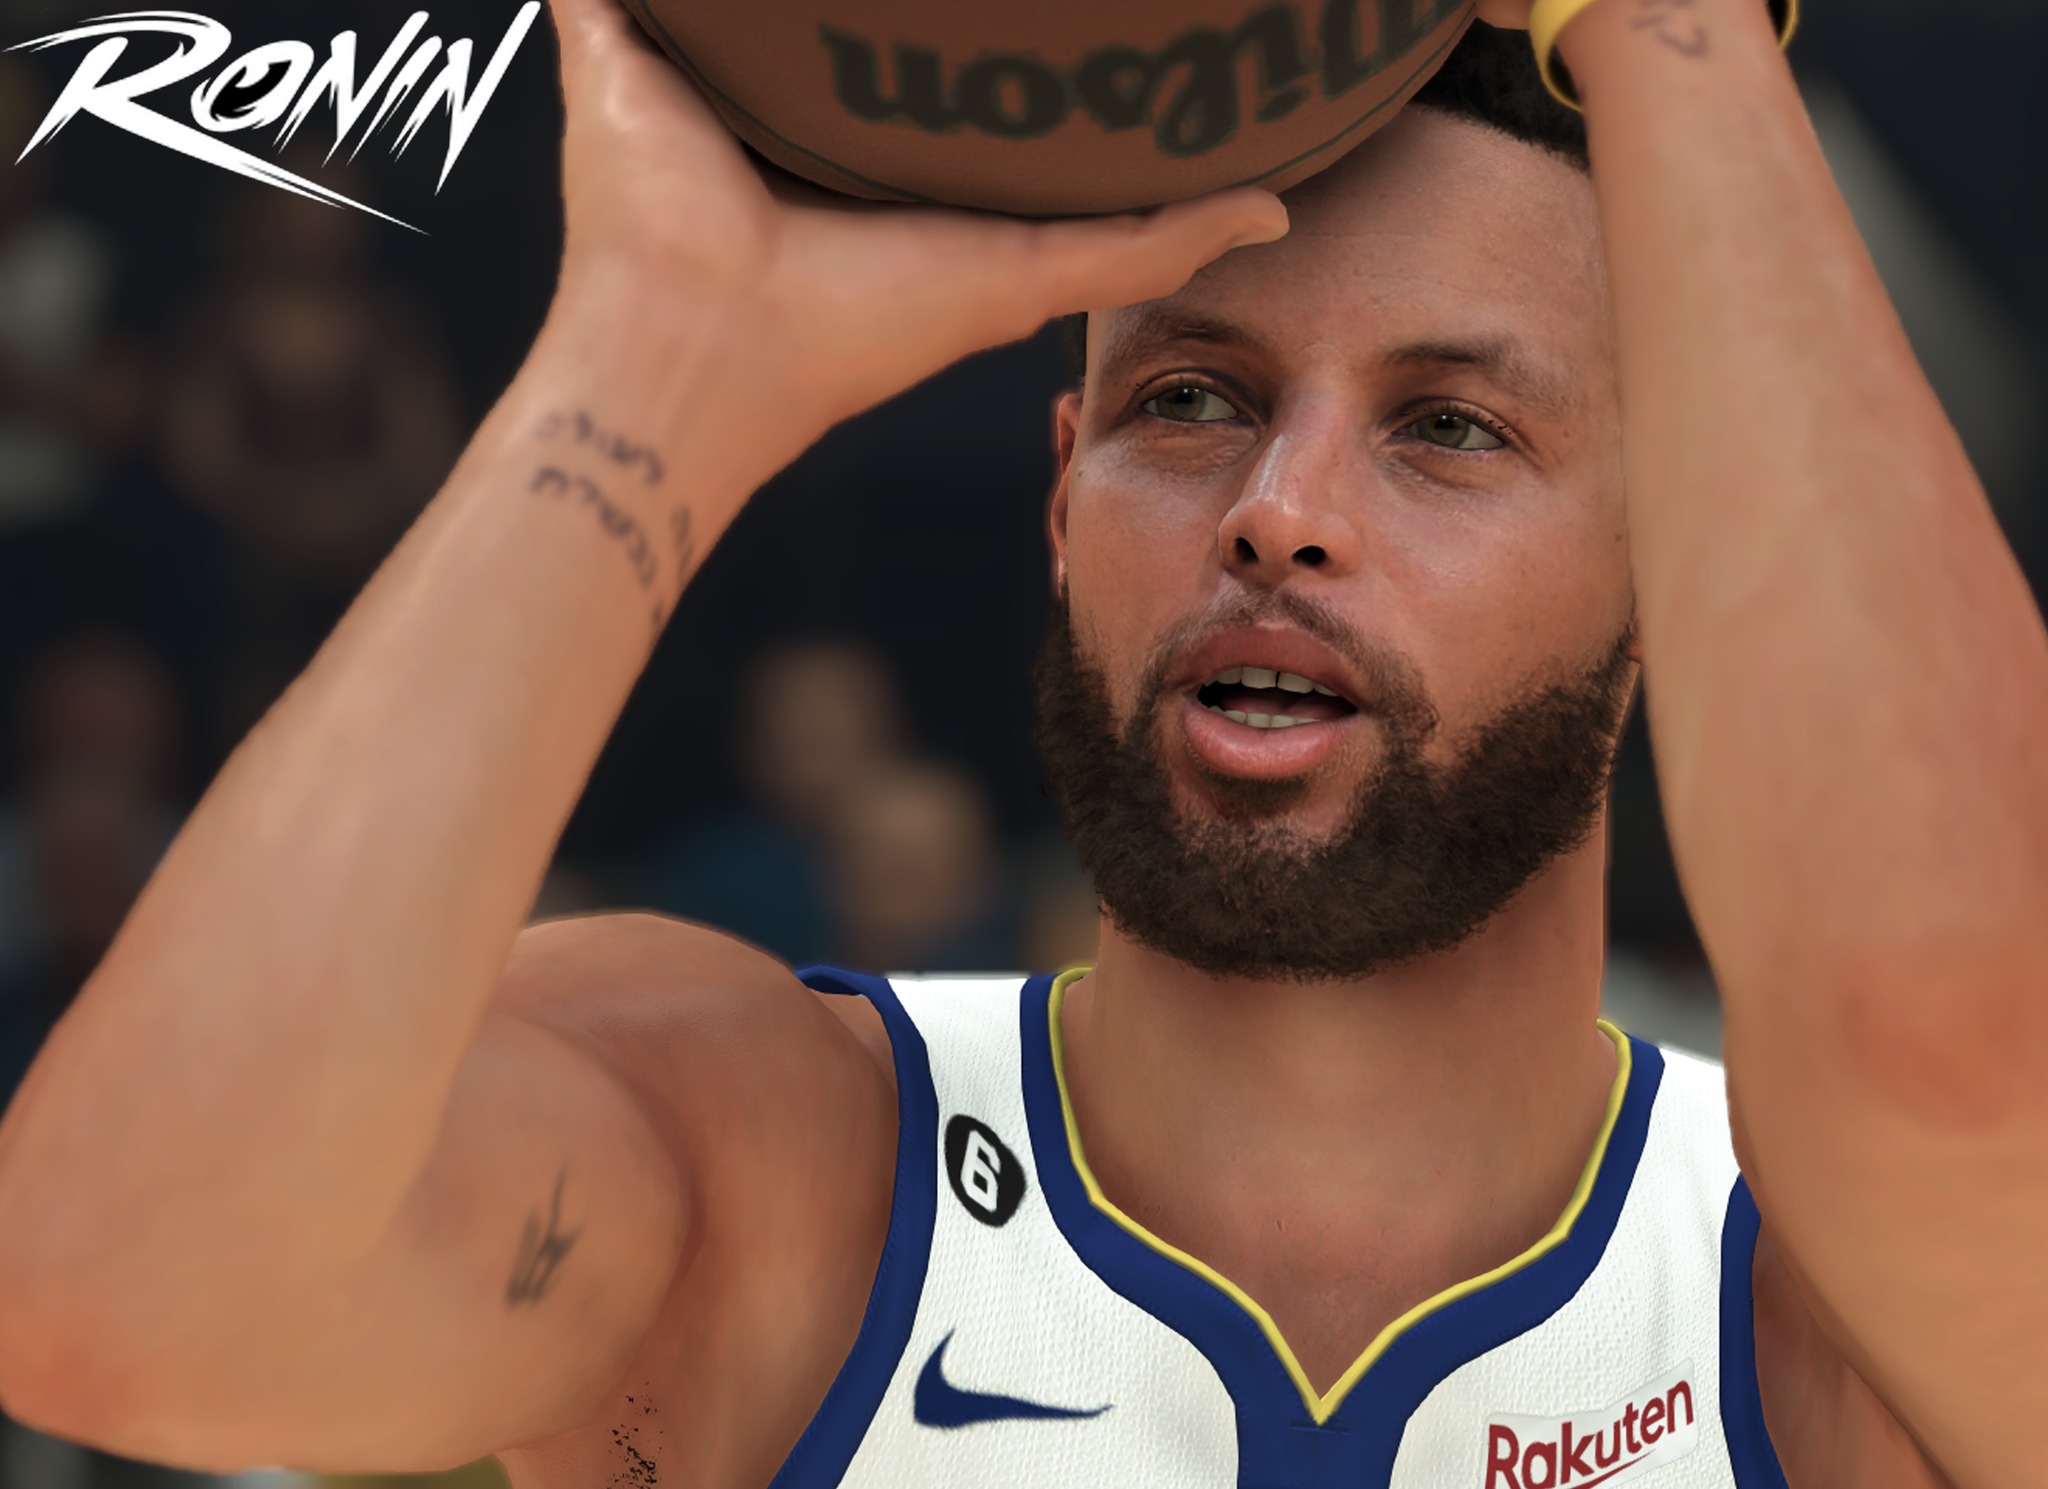 NBA 2K23 Stephen Curry Cyberface (Hairstyles & Wristbands